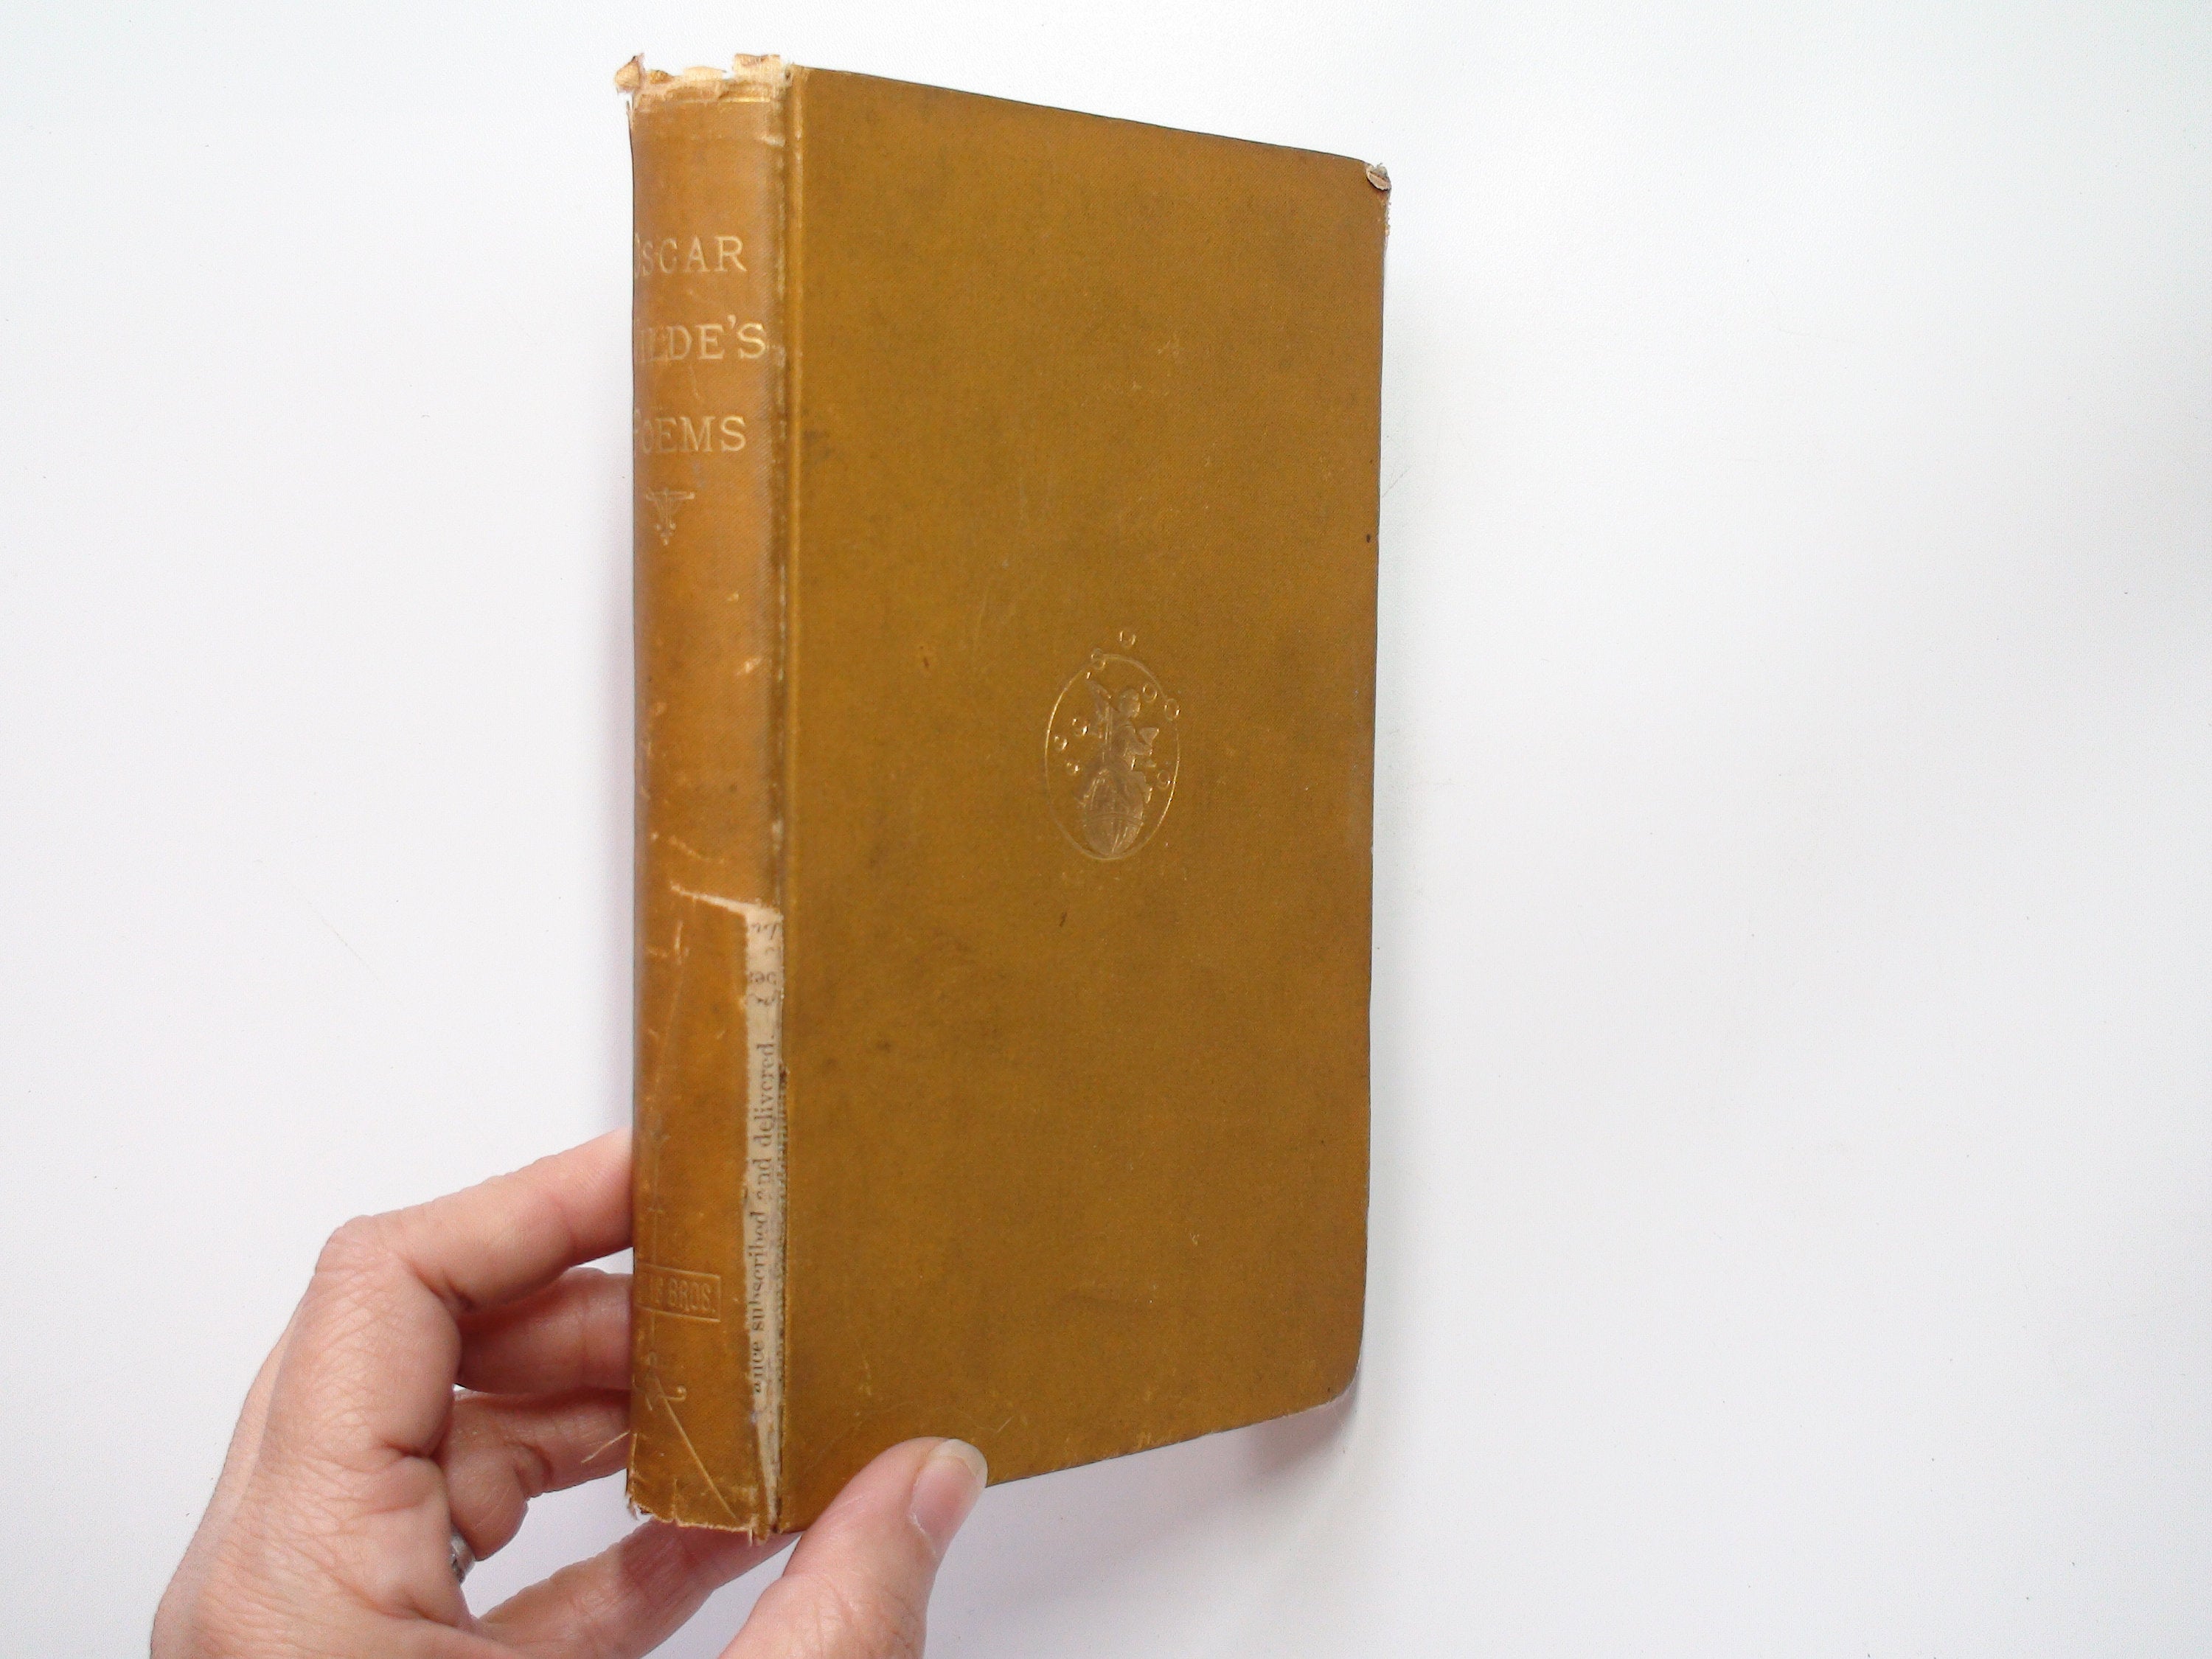 Poems by Oscar Wilde, Rare, Roberts Brothers, 1st American Ed, 1st Printing, 1881